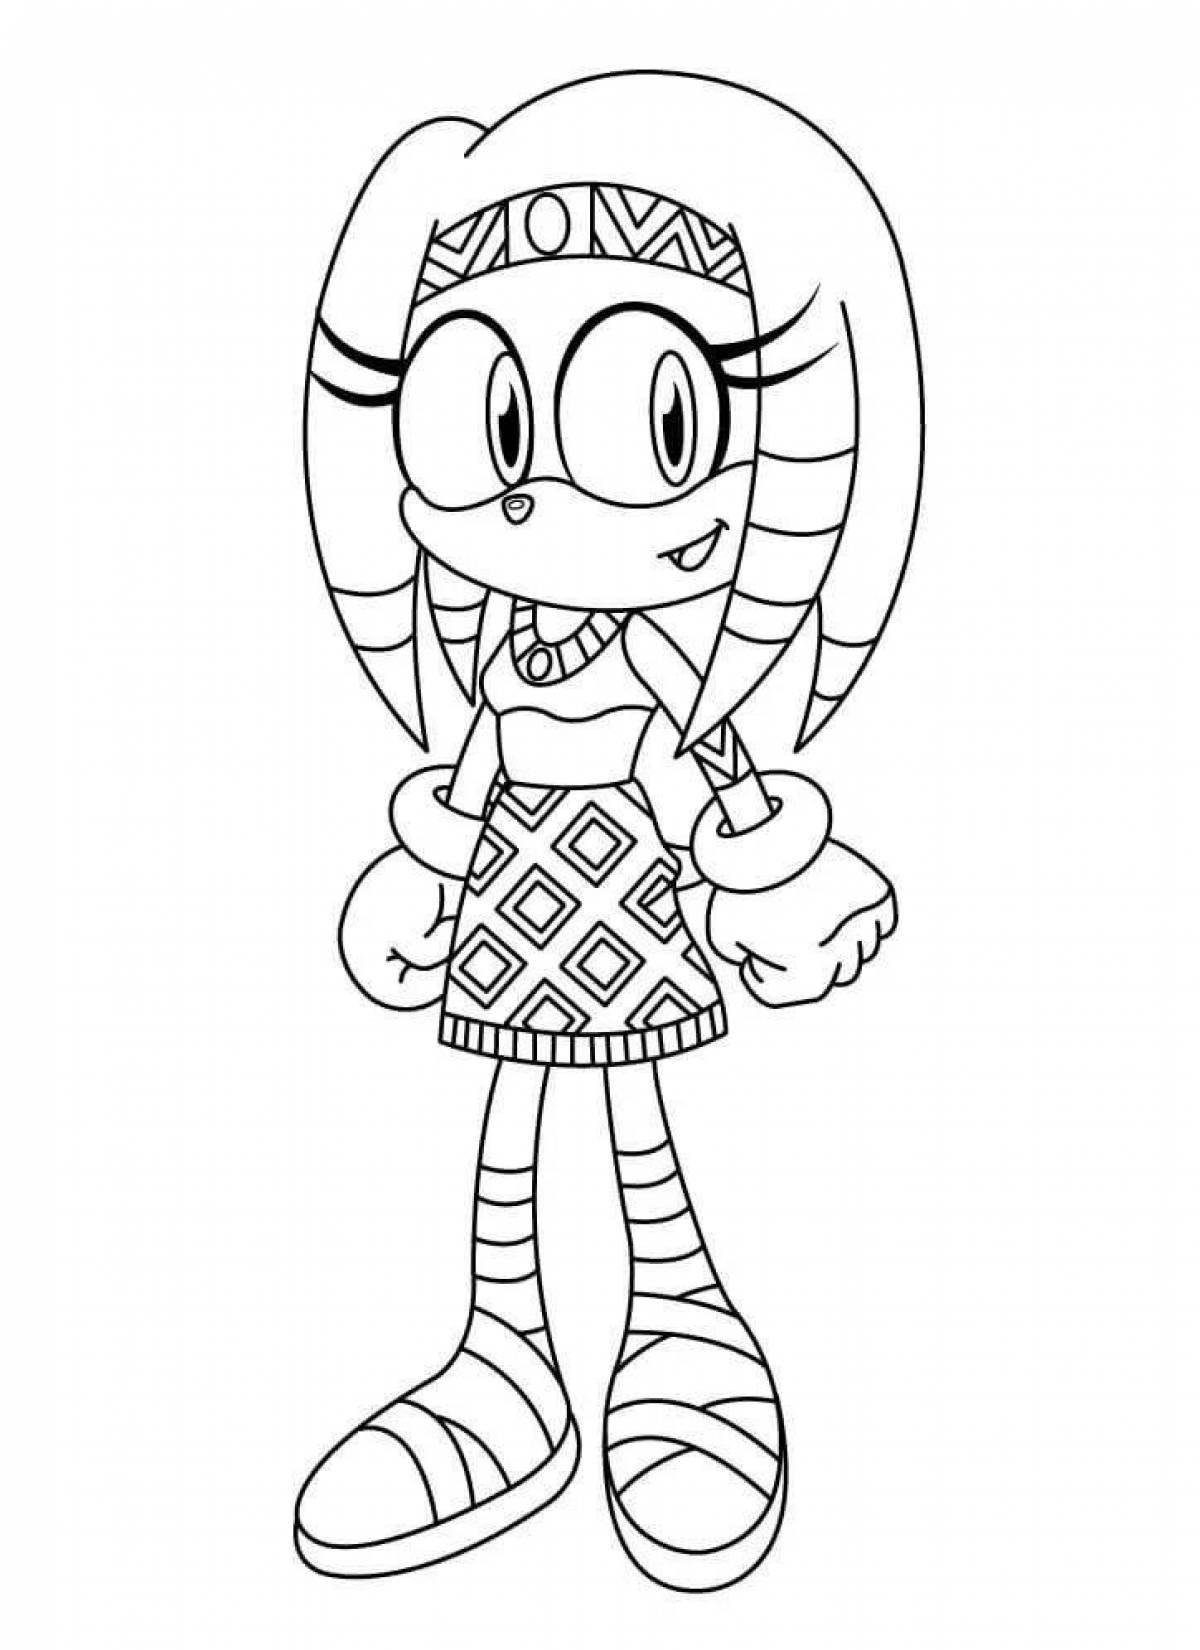 Sparkling sonic girl coloring book